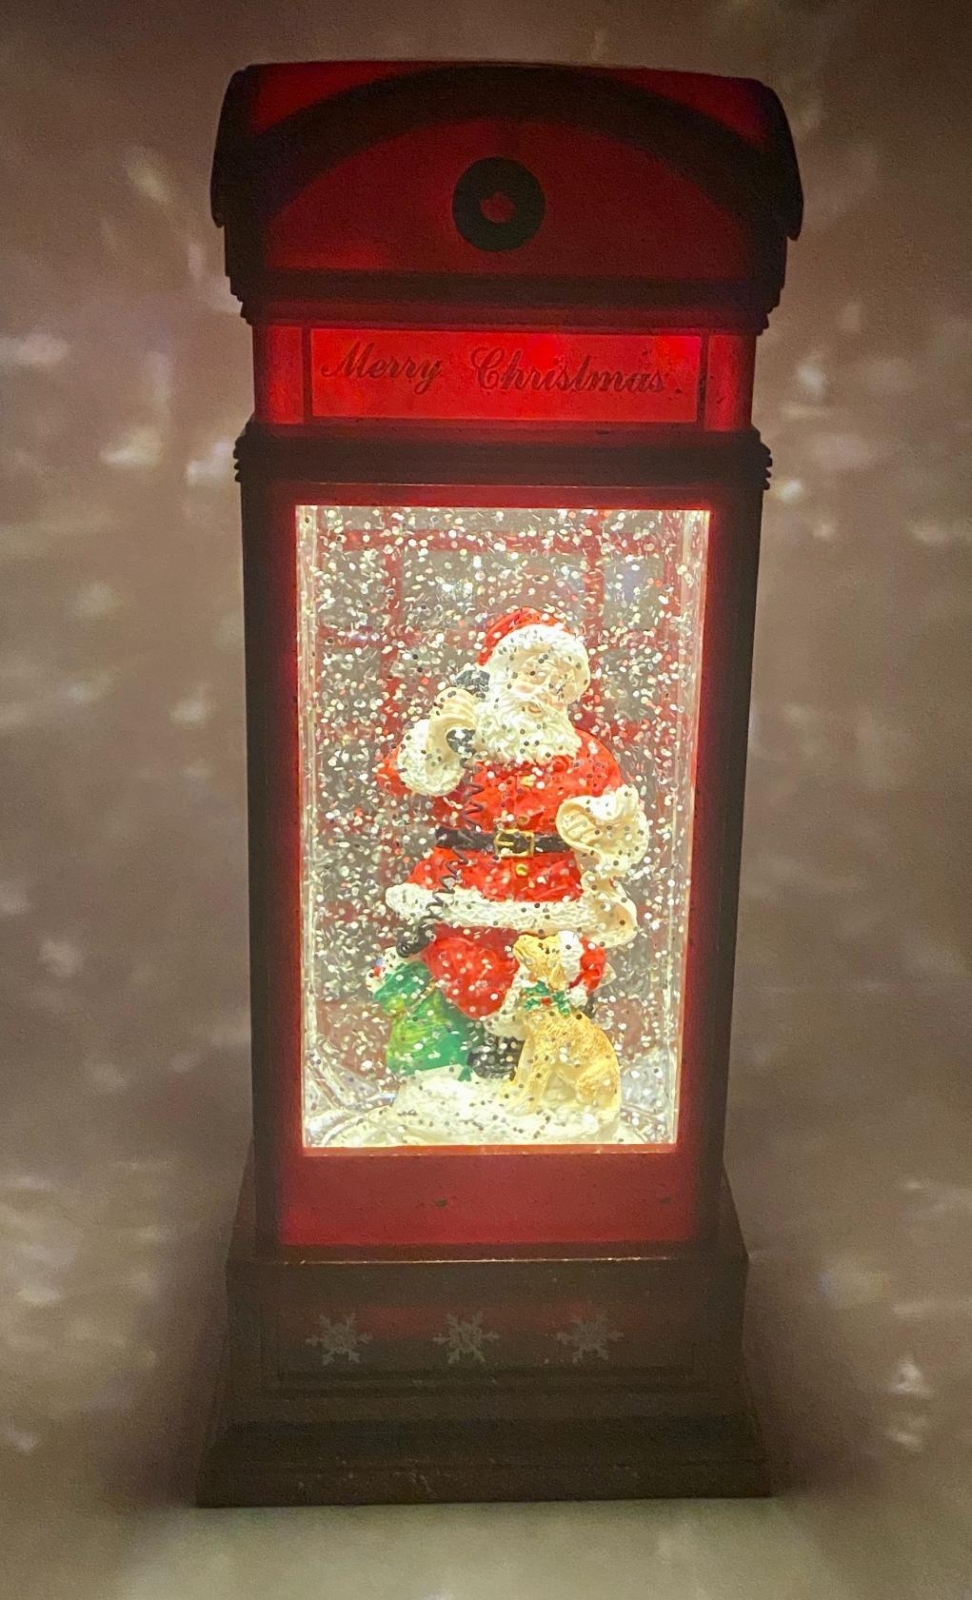 Musical Lighted Santa in a Phone Booth Musical Lighted Santa in a Phone Booth Musical Lighted Santa in a Phone Booth 683332663107-SFMB